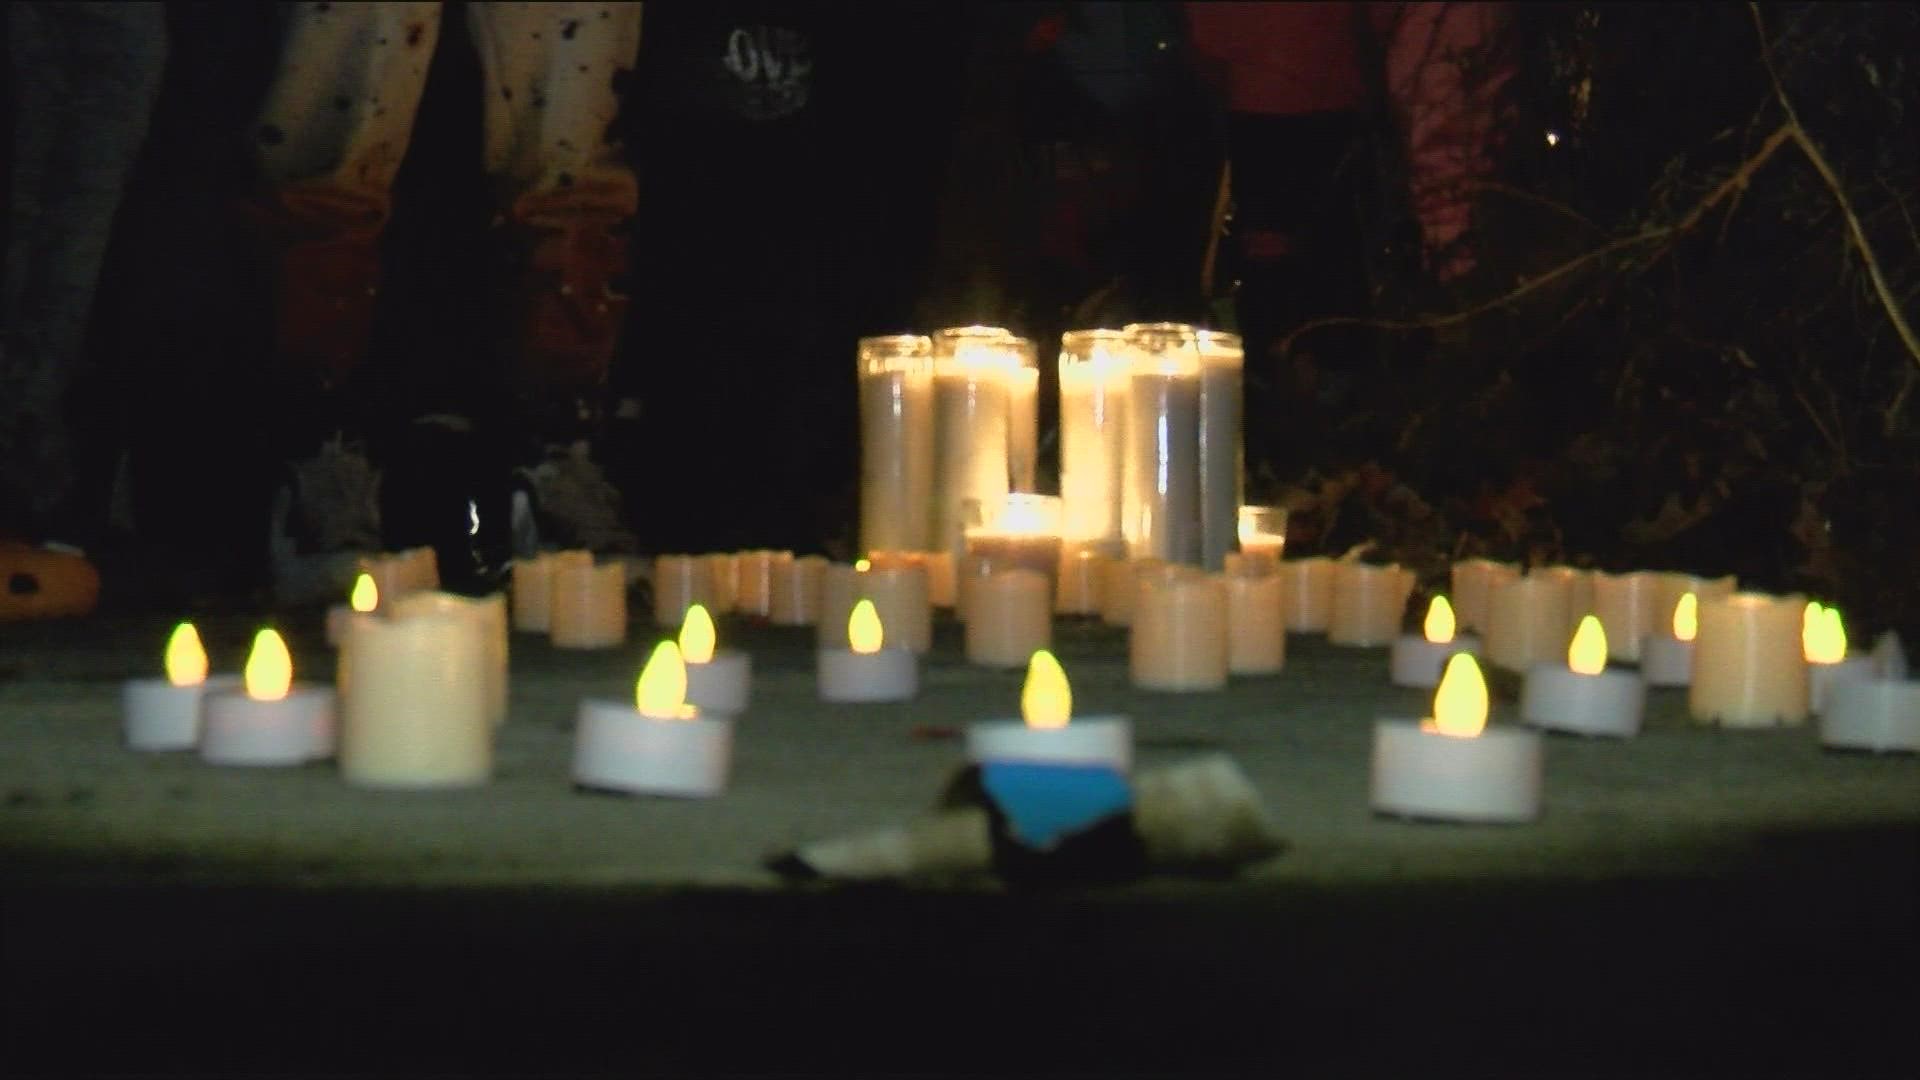 Friday night, family members, friends and loved ones gathered for a vigil to remember the lives of 16-year-old Ke'Marion Wilder and 15-year-old Kyshawn Pittman.